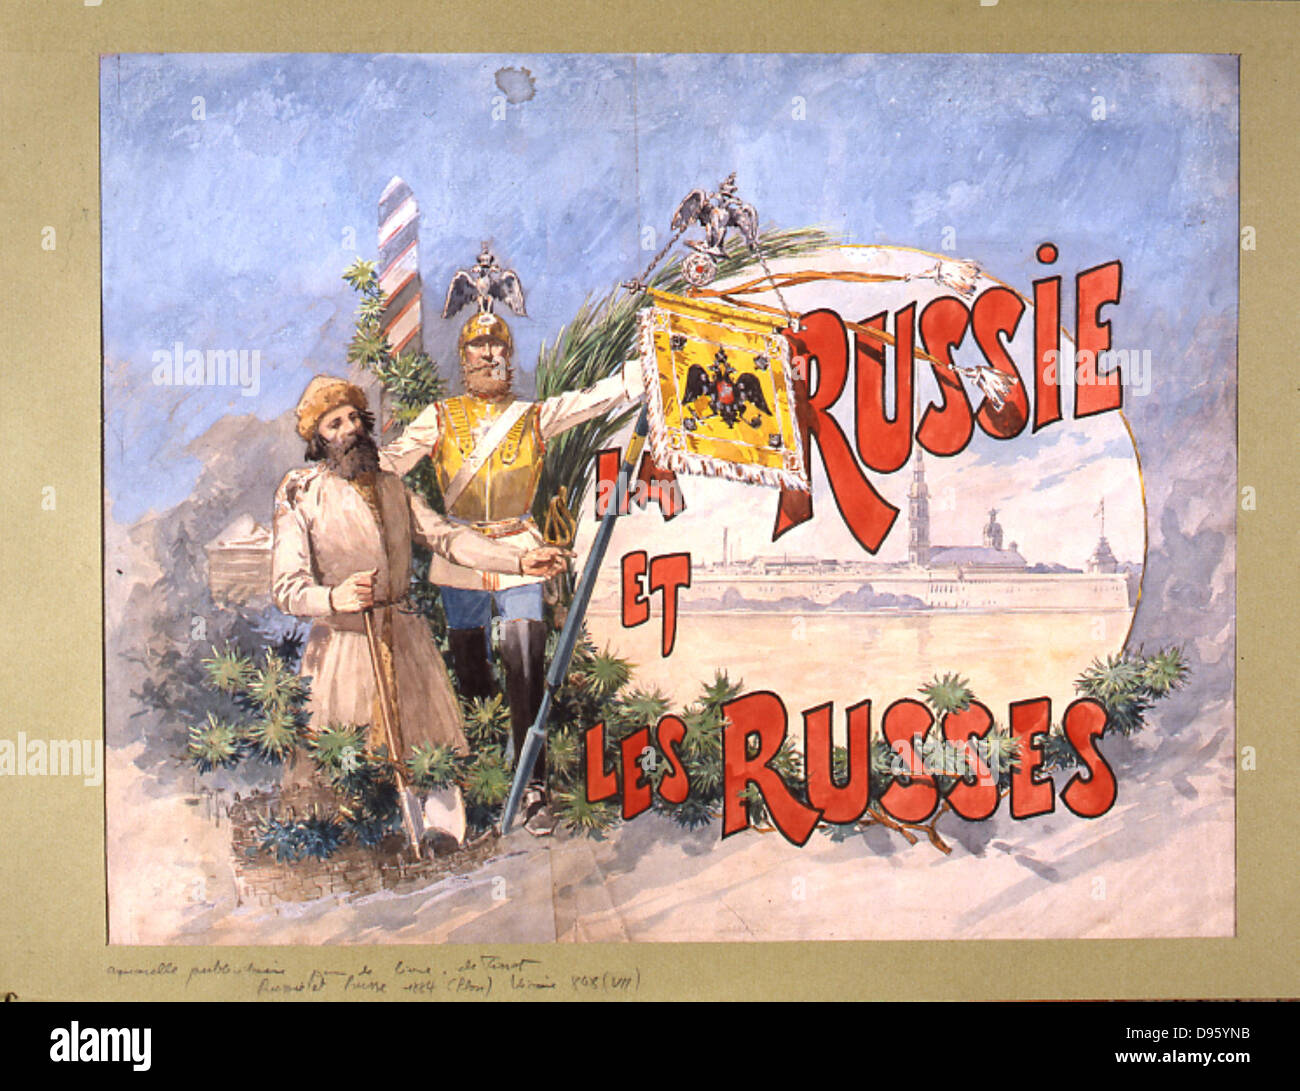 Russia: The State and the People united. Watercolour, 1884. Stock Photo